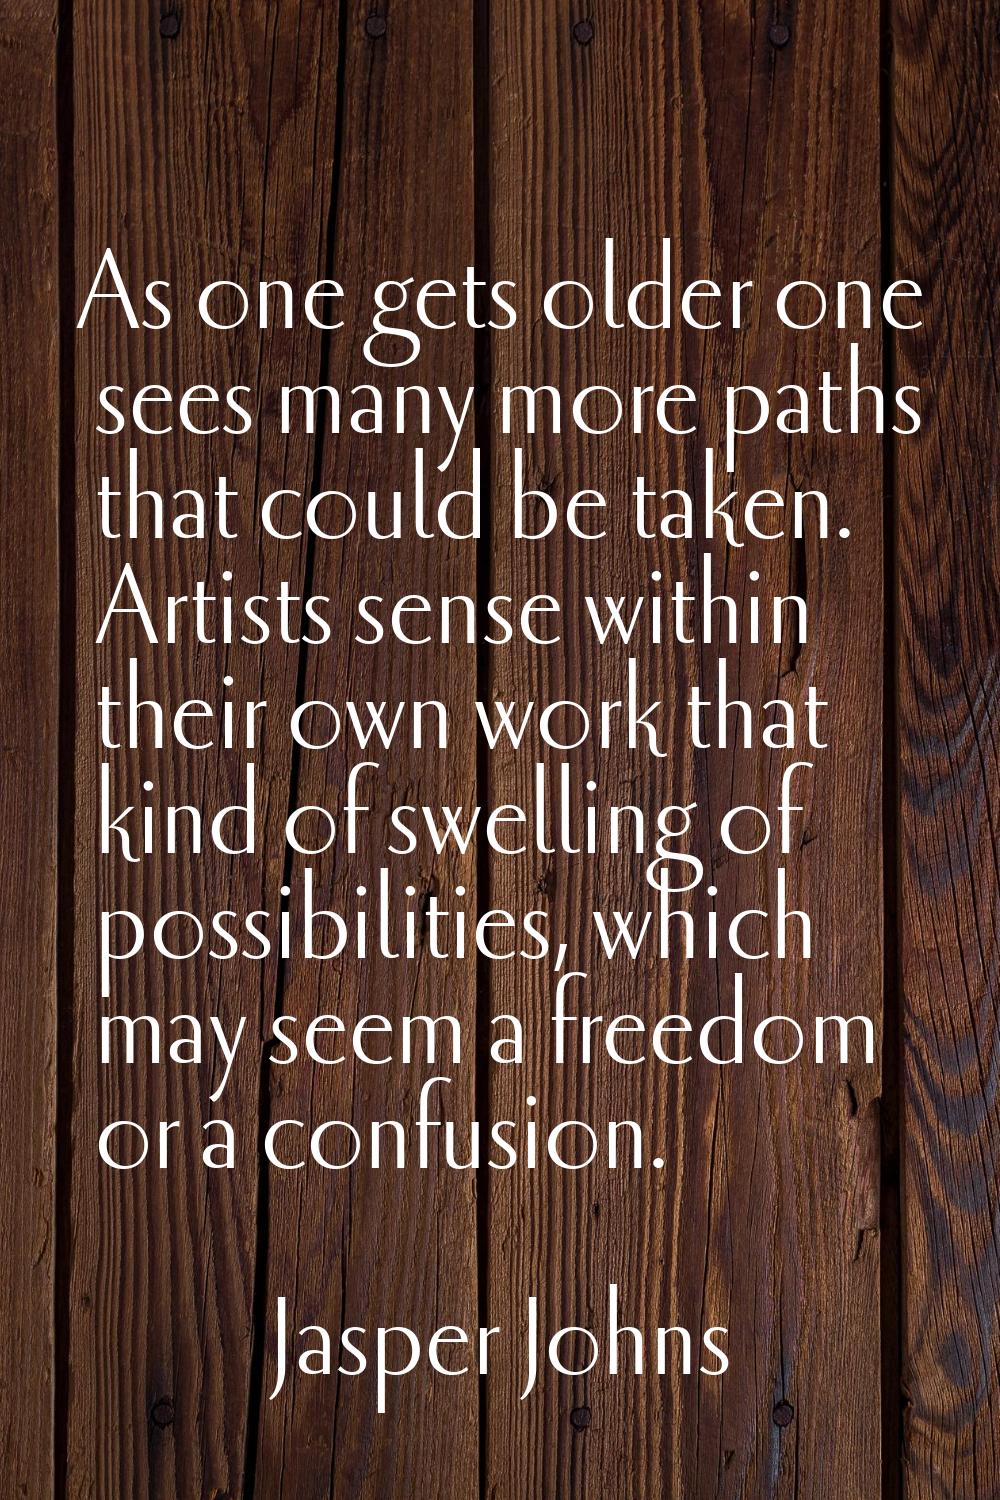 As one gets older one sees many more paths that could be taken. Artists sense within their own work